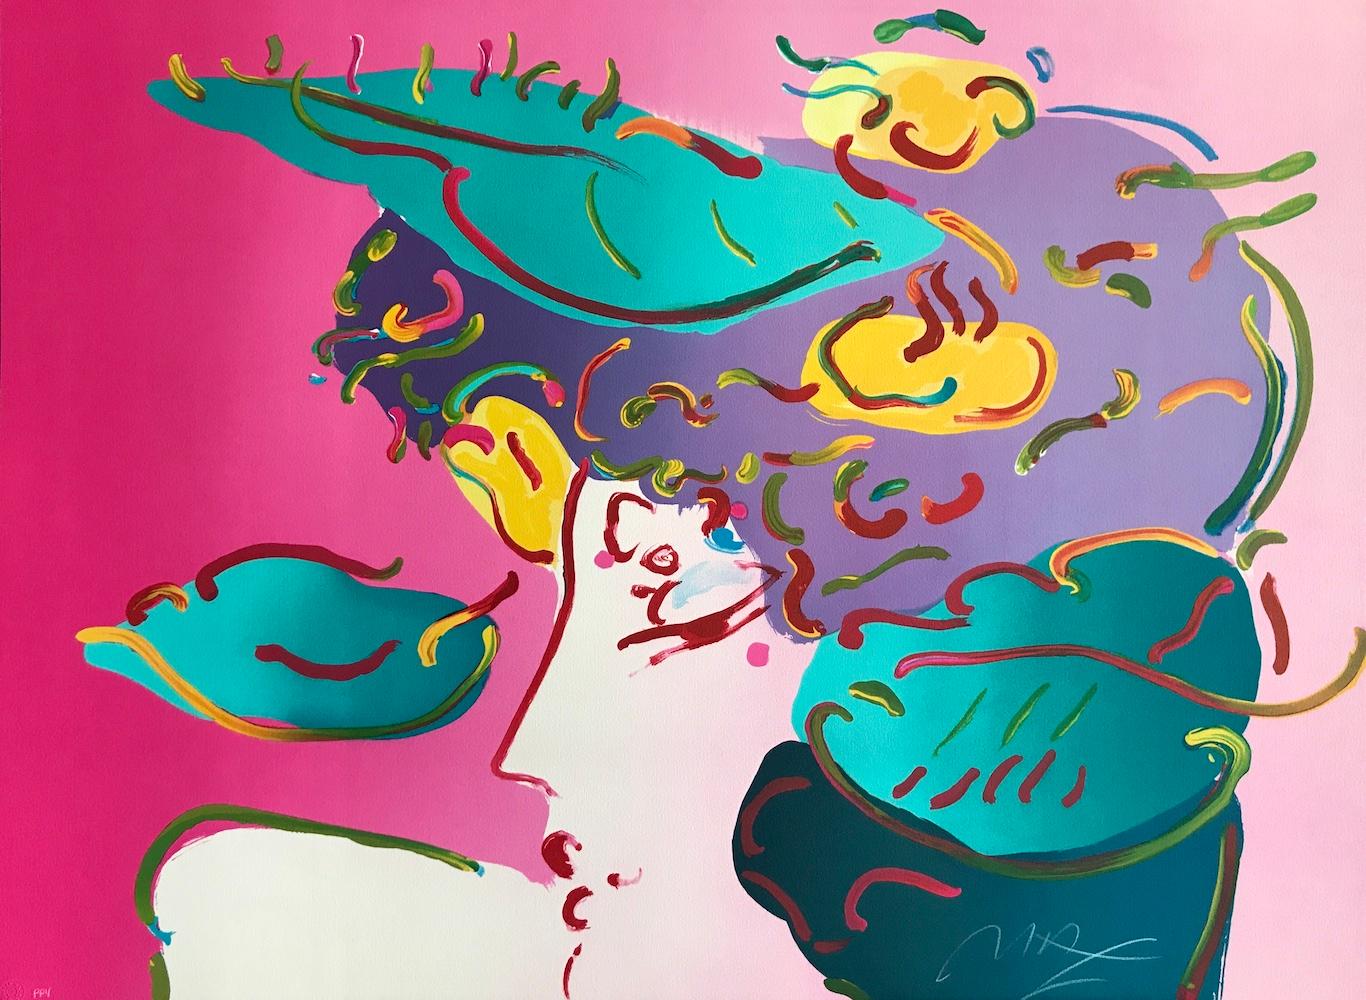 Peter Max Figurative Print - FLOWER SPECTRUM II Signed Lithograph, Woman Profile Portrait Pink, Green, Yellow